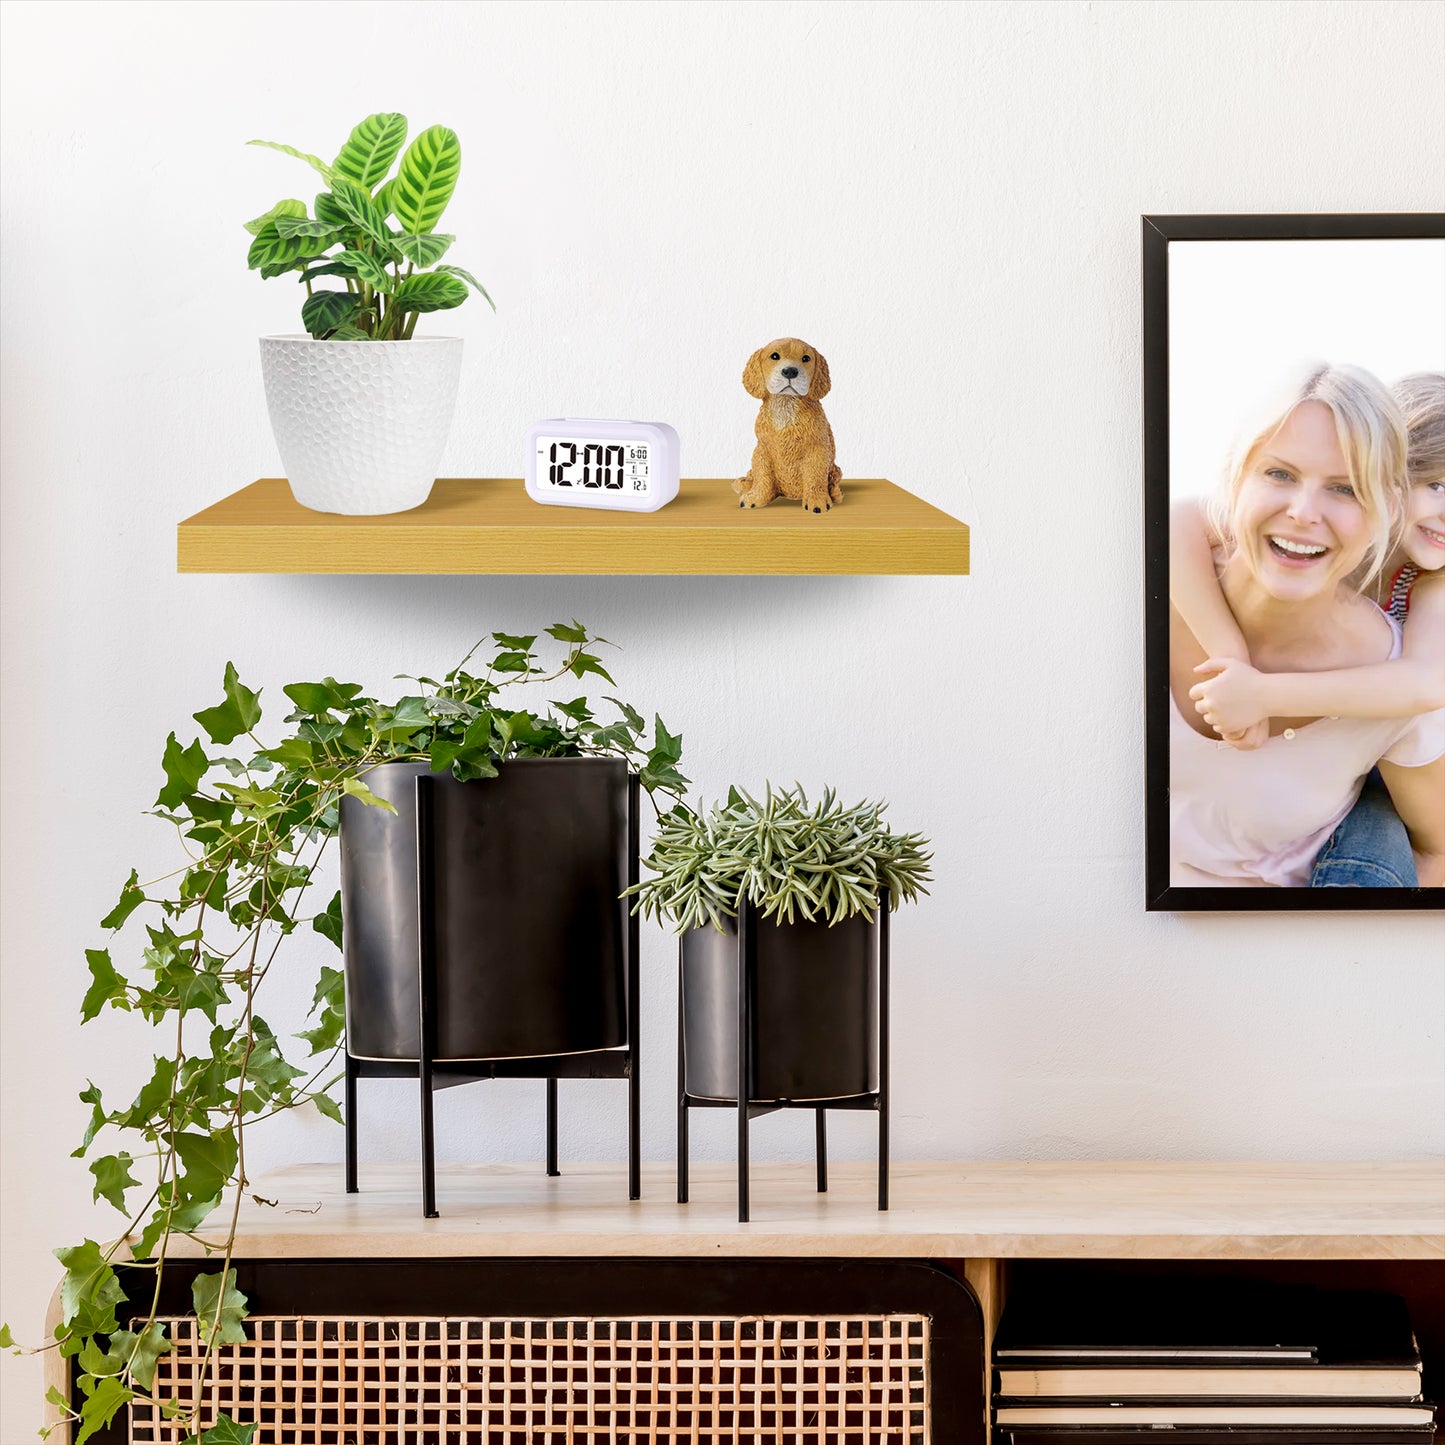 Add Style and Functionality with Floating Wooden Shelves